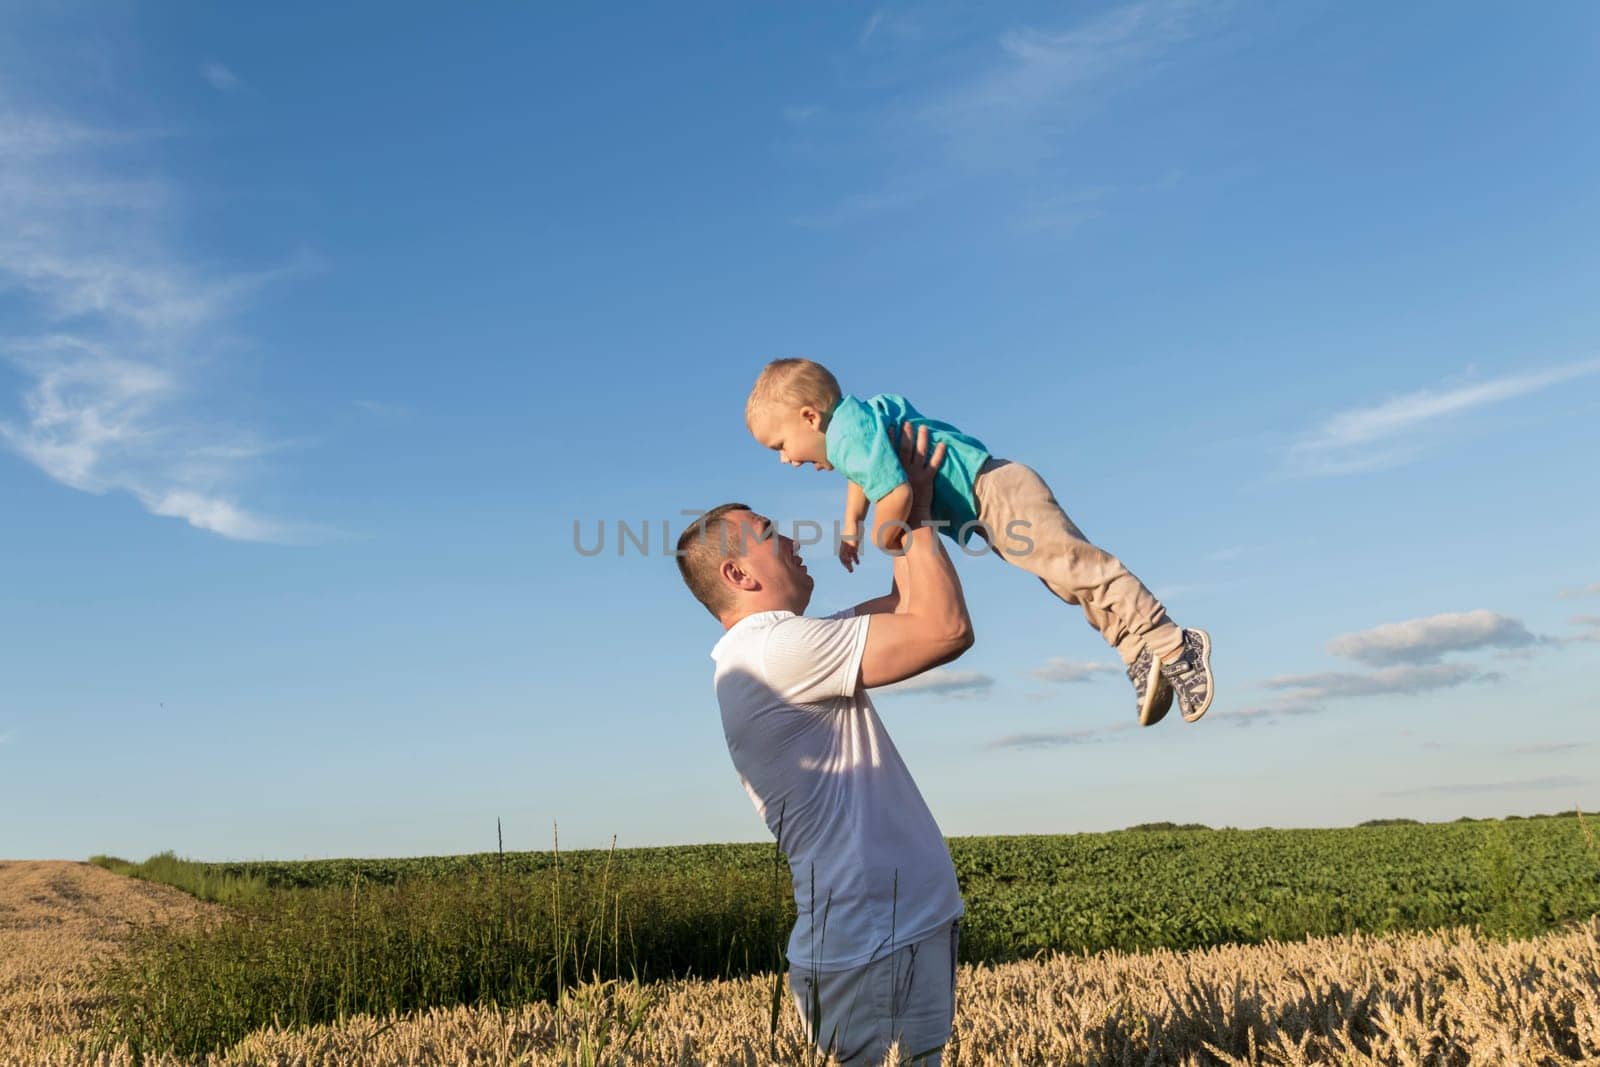 Dad and his little son are having fun walking in a field with ripe wheat. Grain for making bread. the concept of economic crisis and hunger. by Alla_Yurtayeva